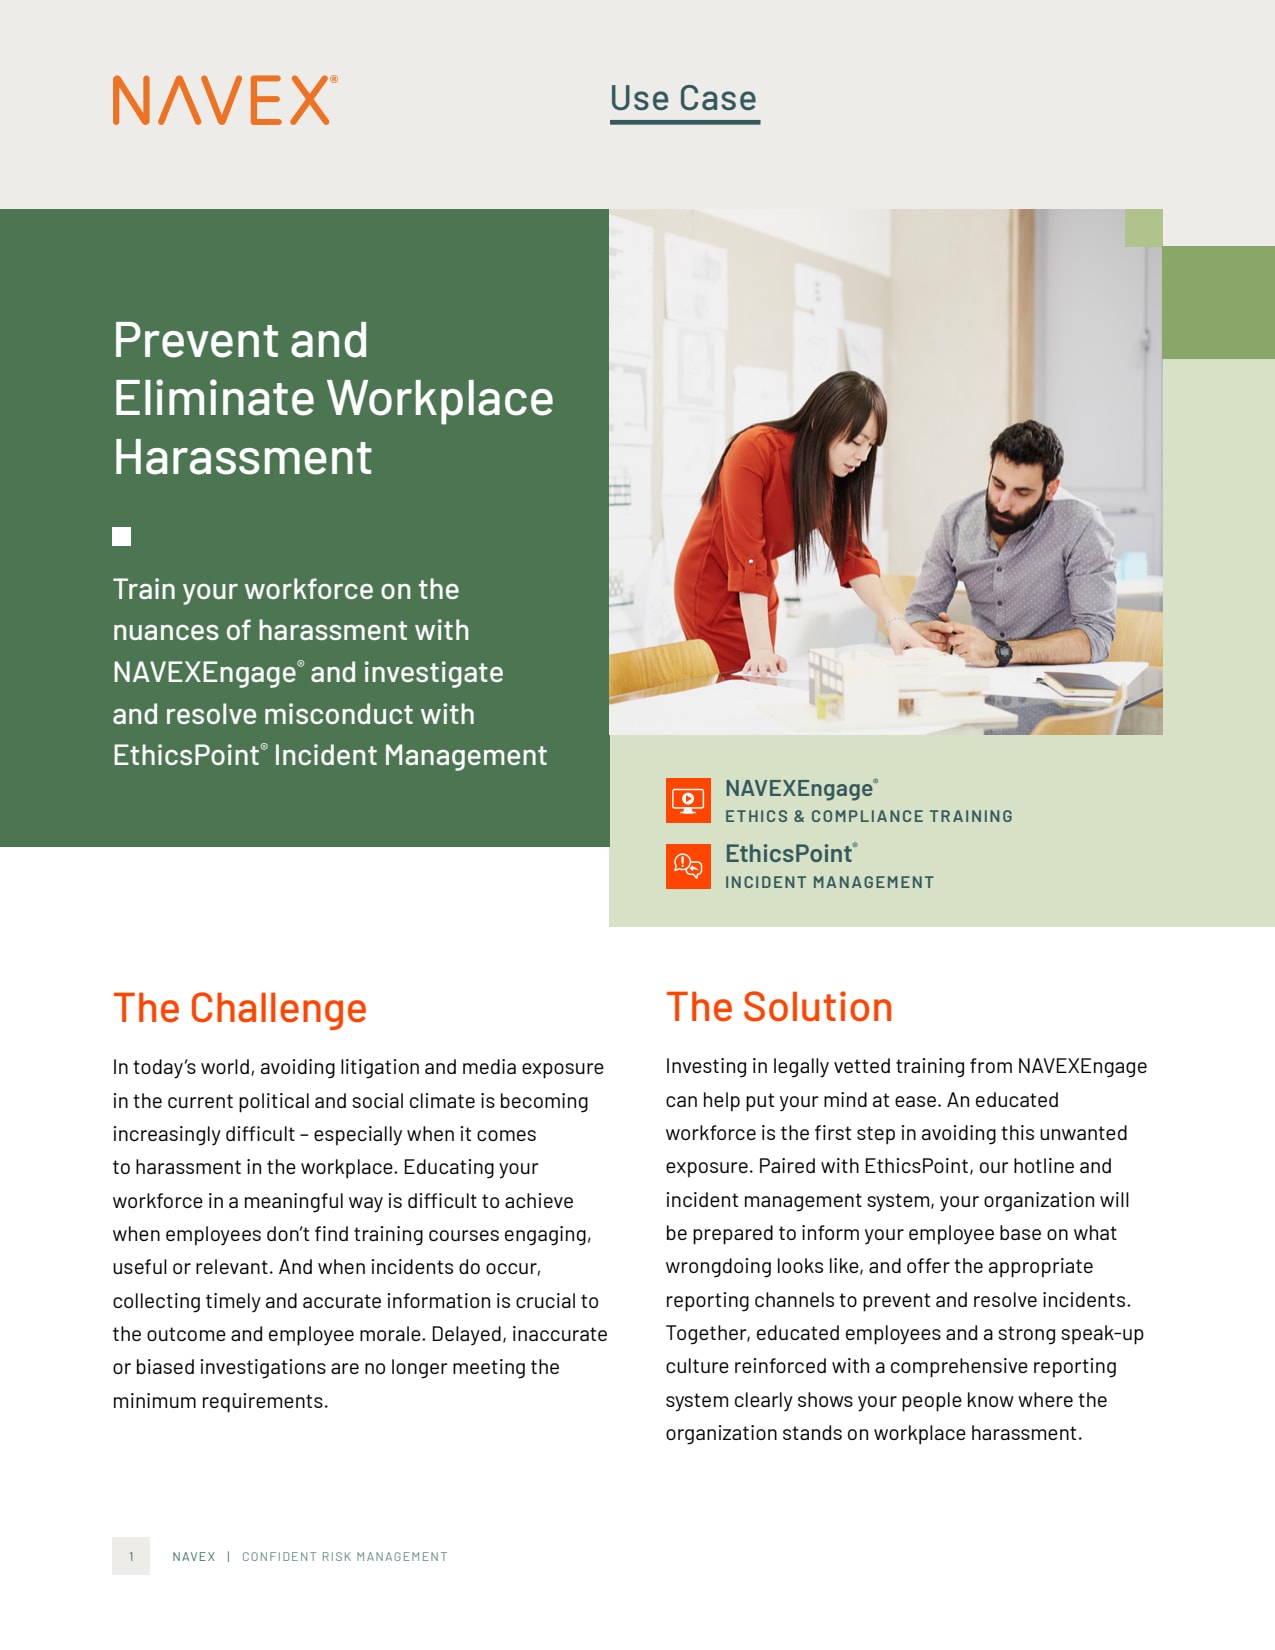 Prevent and eliminate workplace harassment